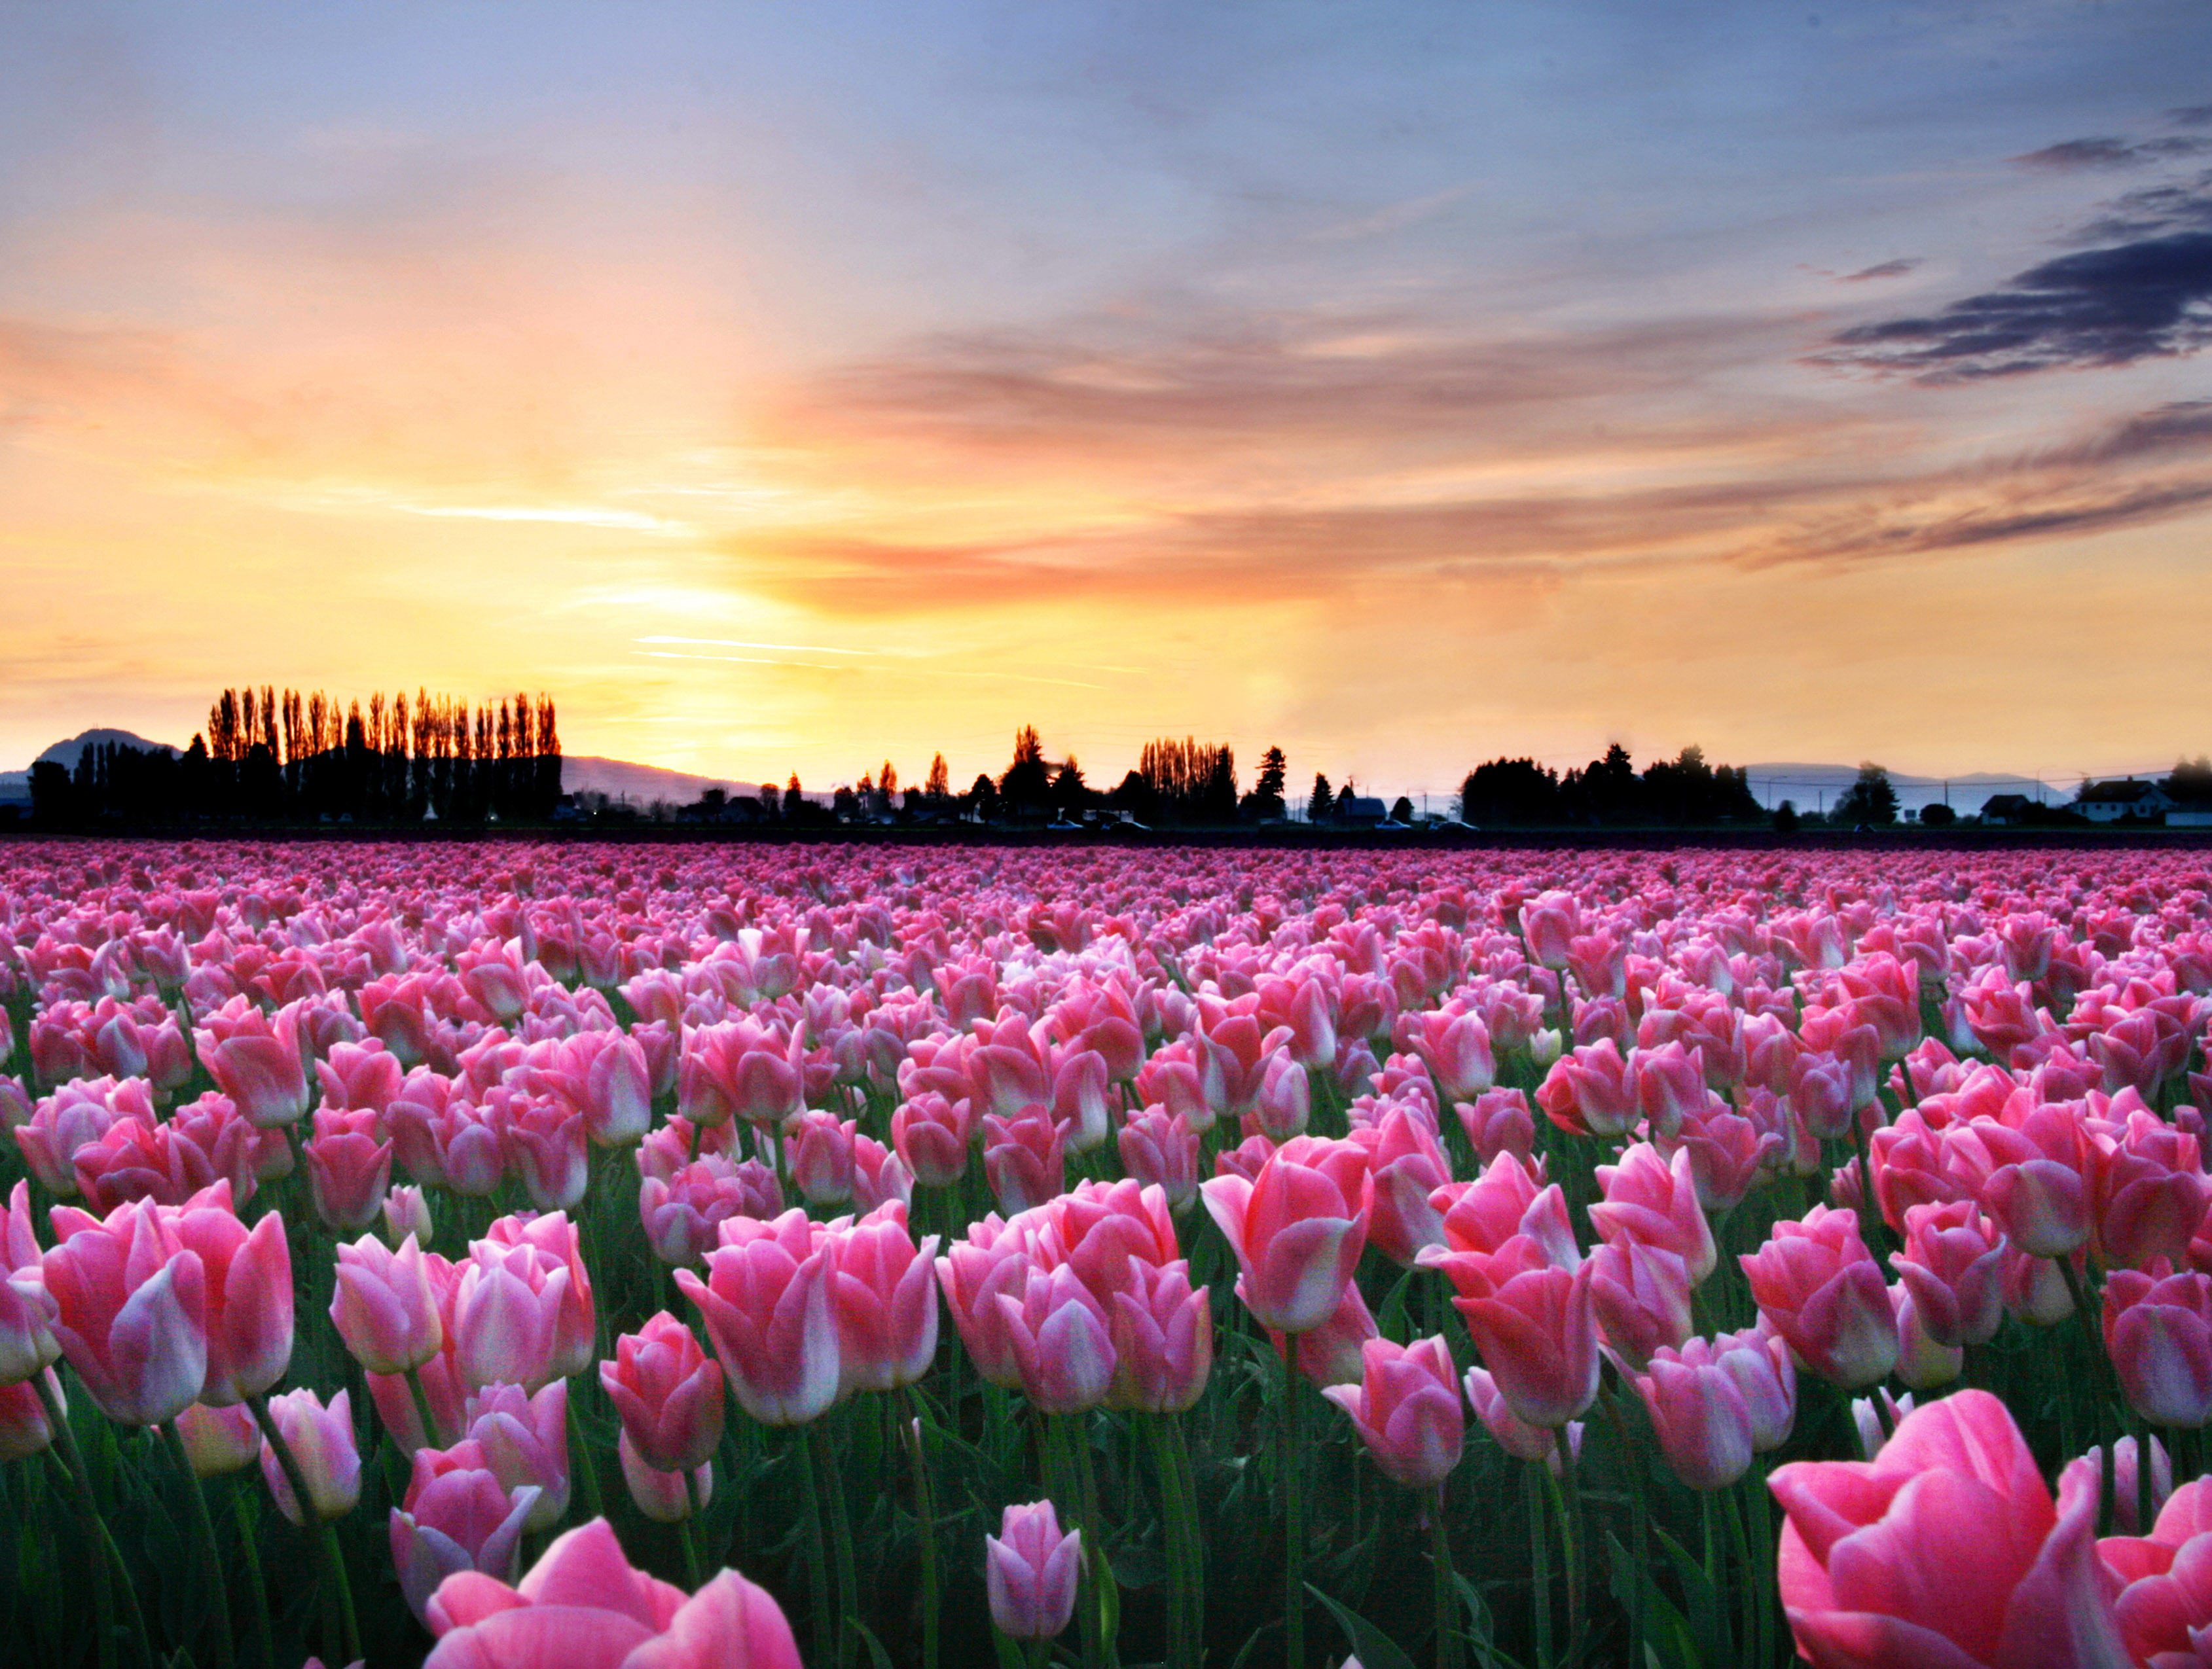 SKAGIT VALLEY TULIP FESTIVAL - Andy Porter Images